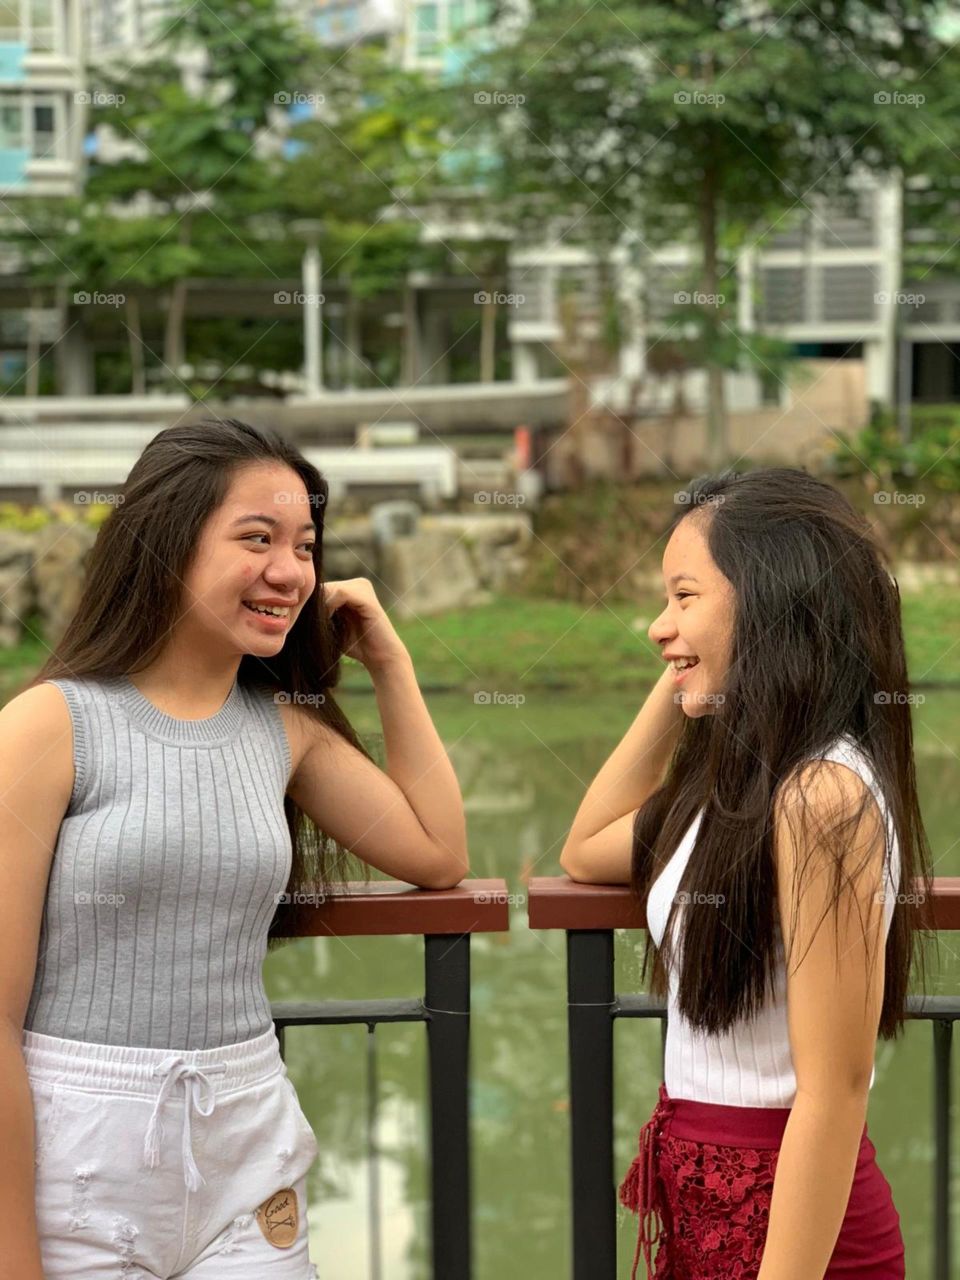 Stolen shot of two girls laughing 